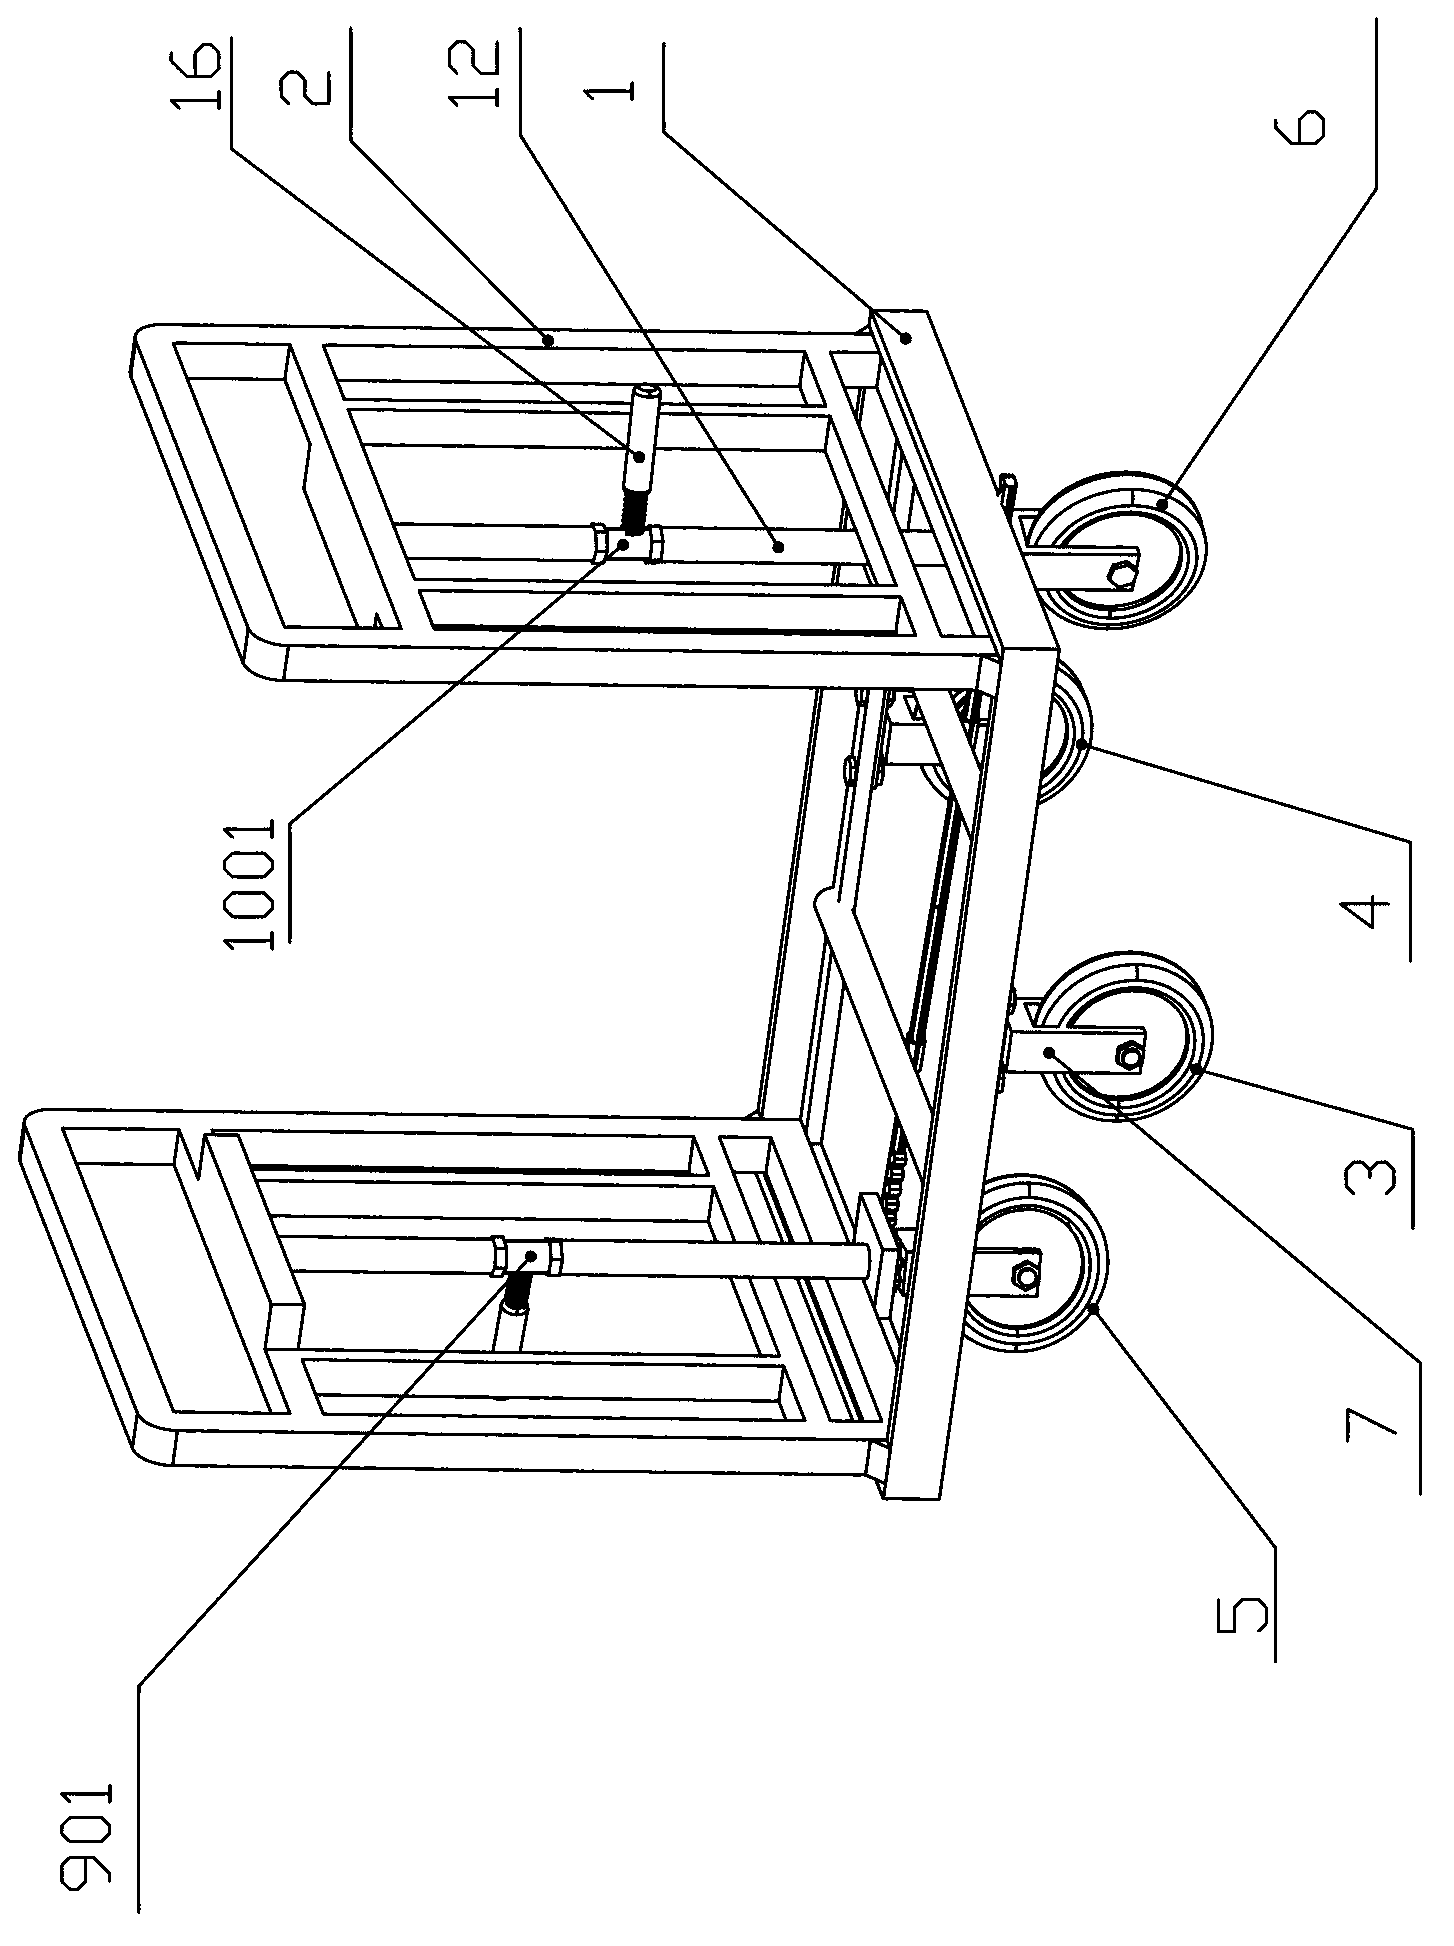 Four-wheeled hand truck capable of achieving pivot steering